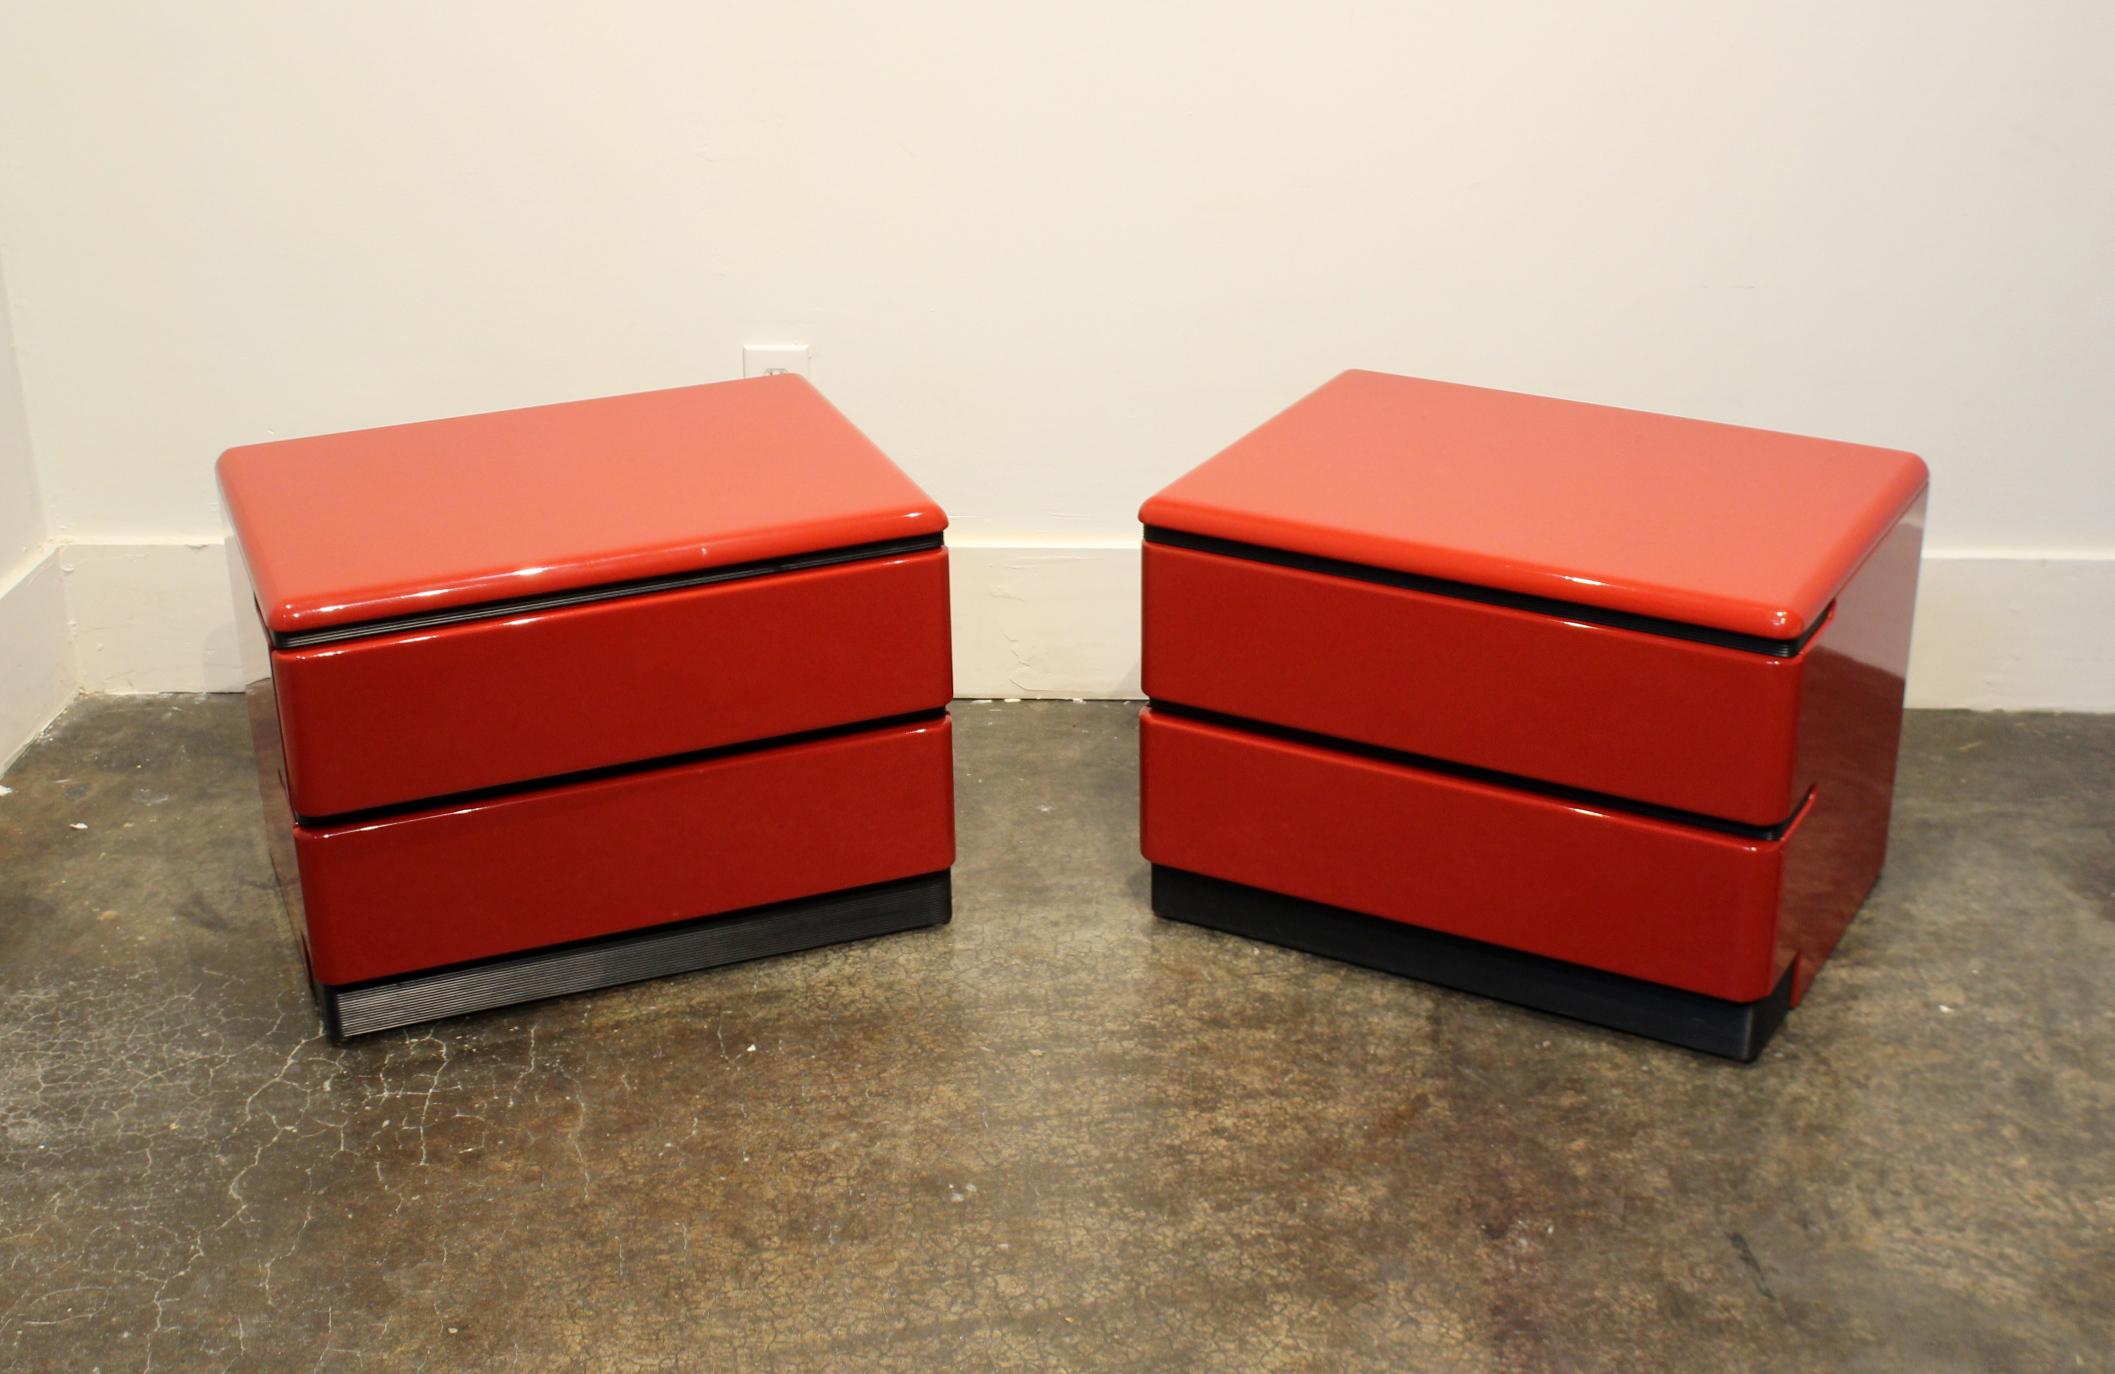 Lacquered red nightstands with black-ribbed accents and pulls by Canadian manufacturer and 1980s design icon, Roger Rougier. Both in very good condition with minor wear.